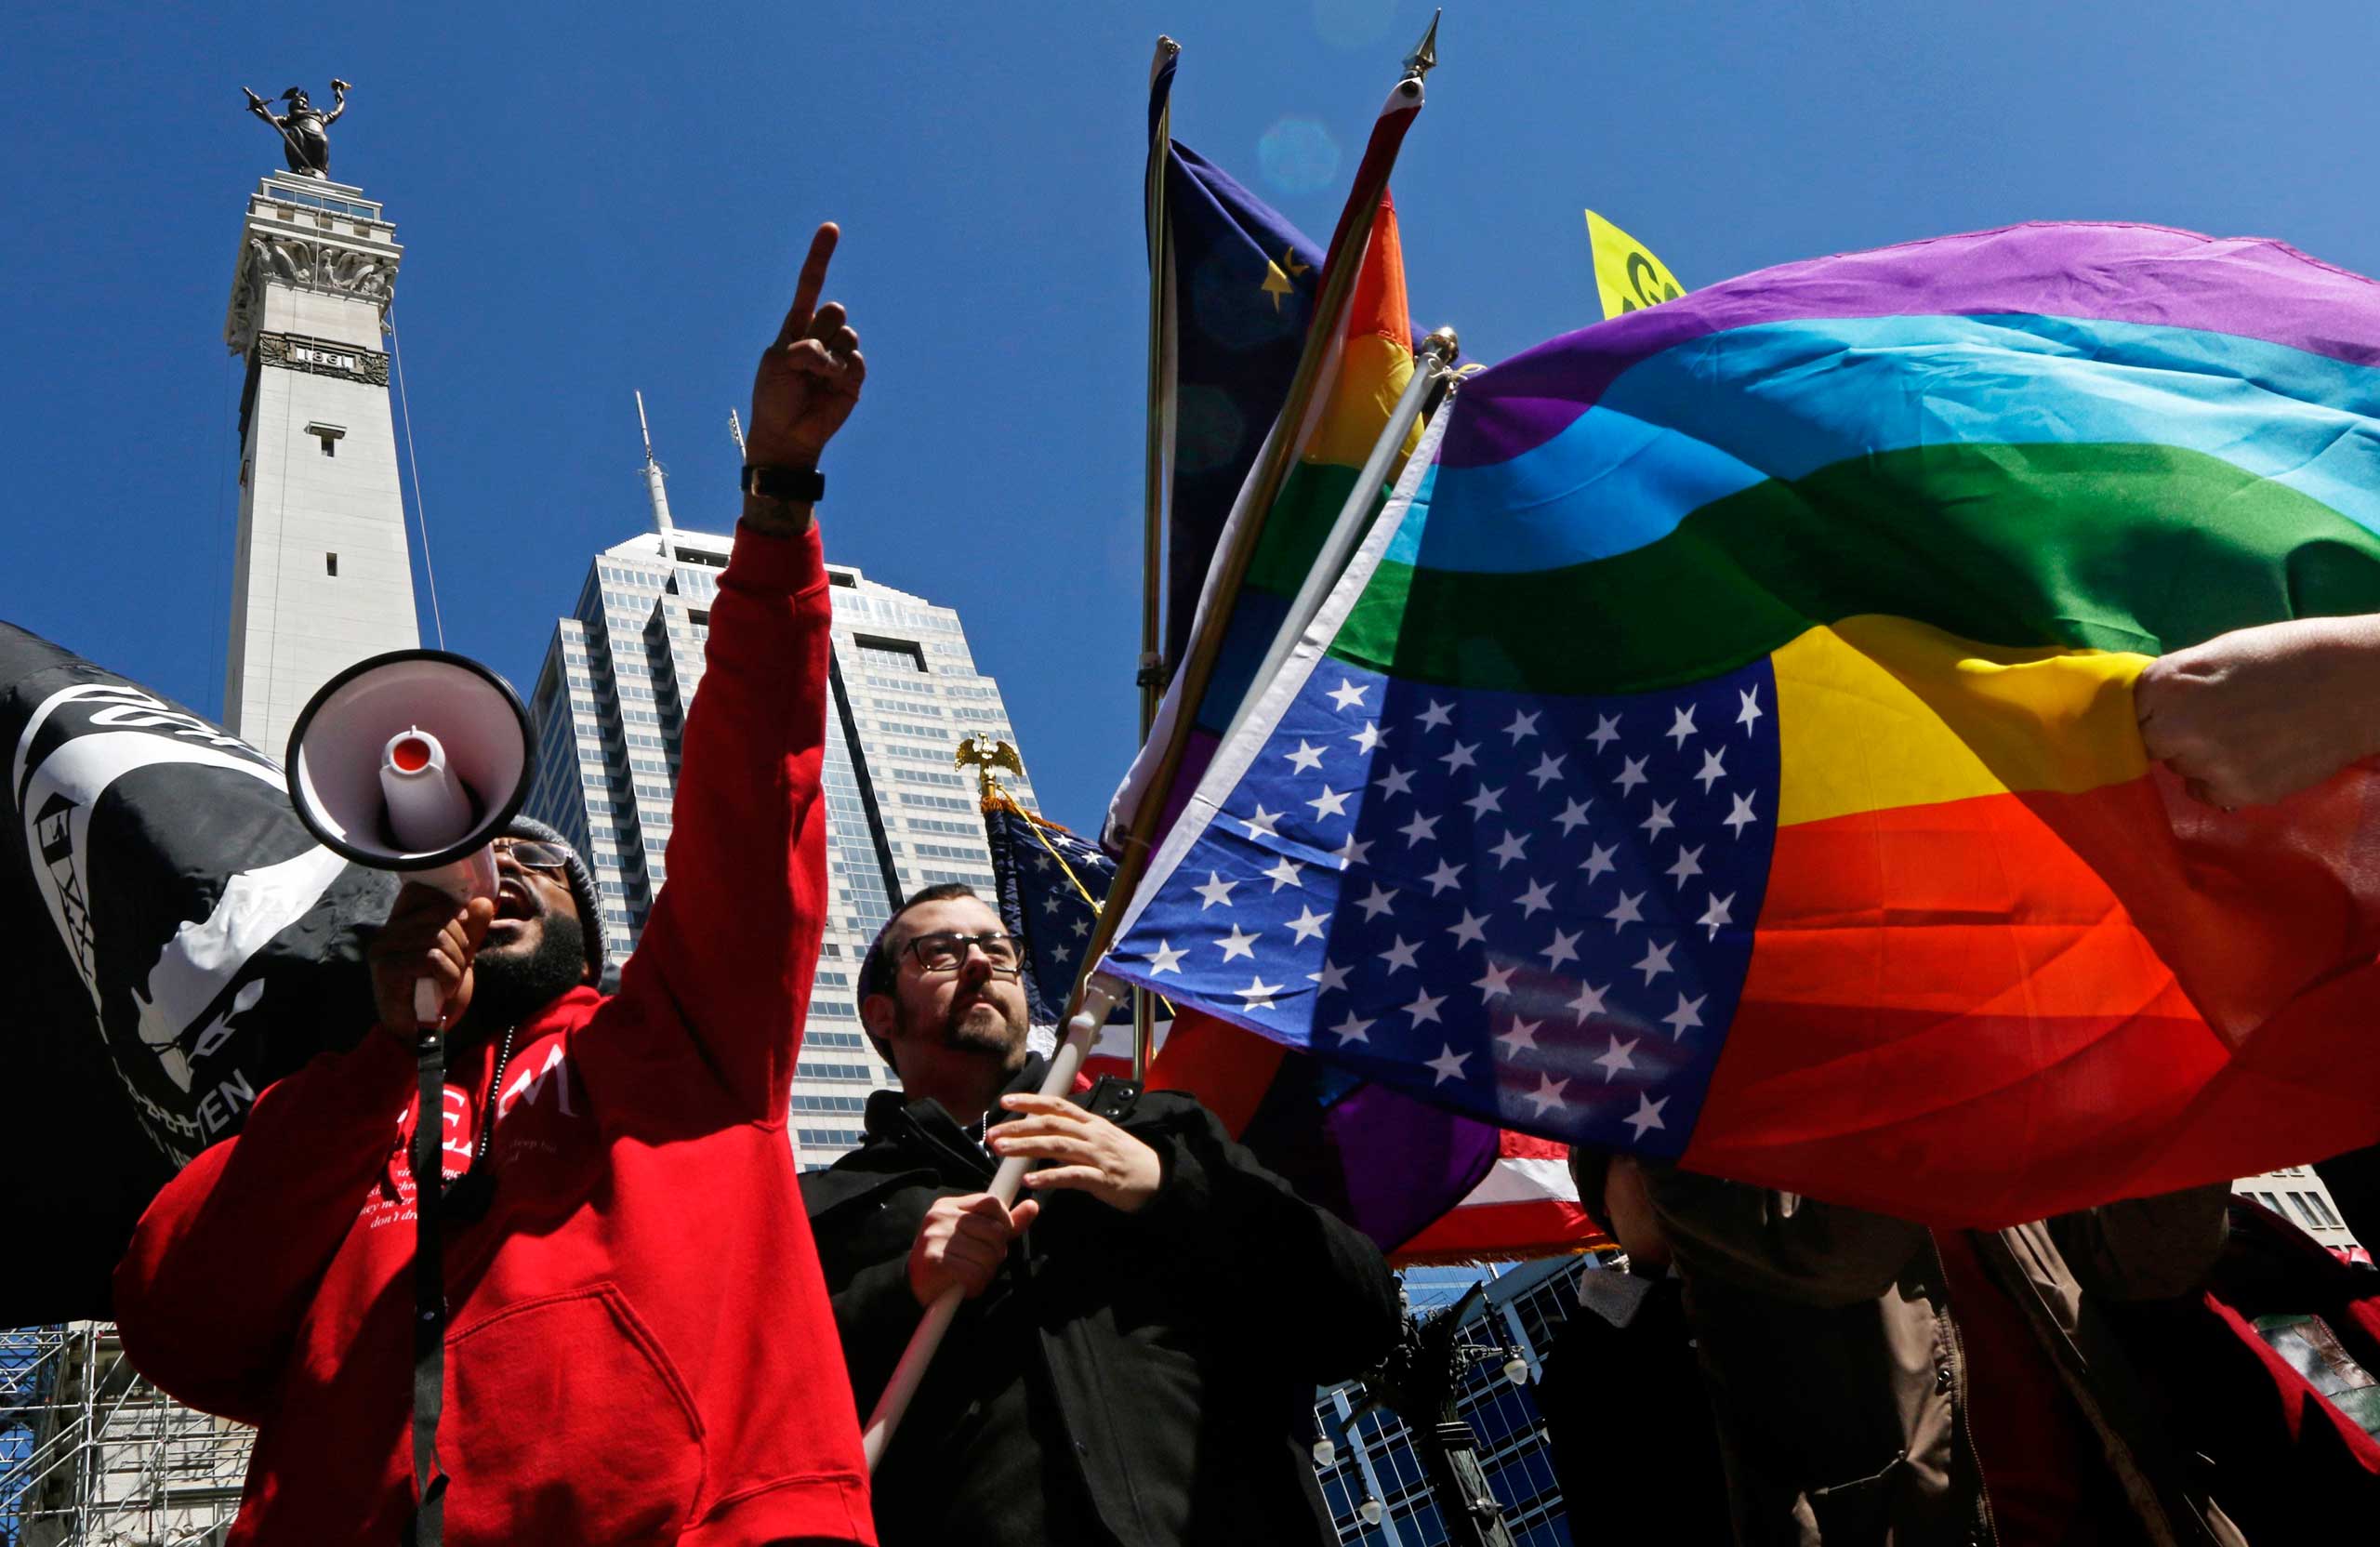 Organizers fire up a crowd of demonstrators gathered to protest a controversial religious freedom bill recently signed by Governor Mike Pence, in Indianapolis on March 28, 2015. (Nate Chute—Reuters)